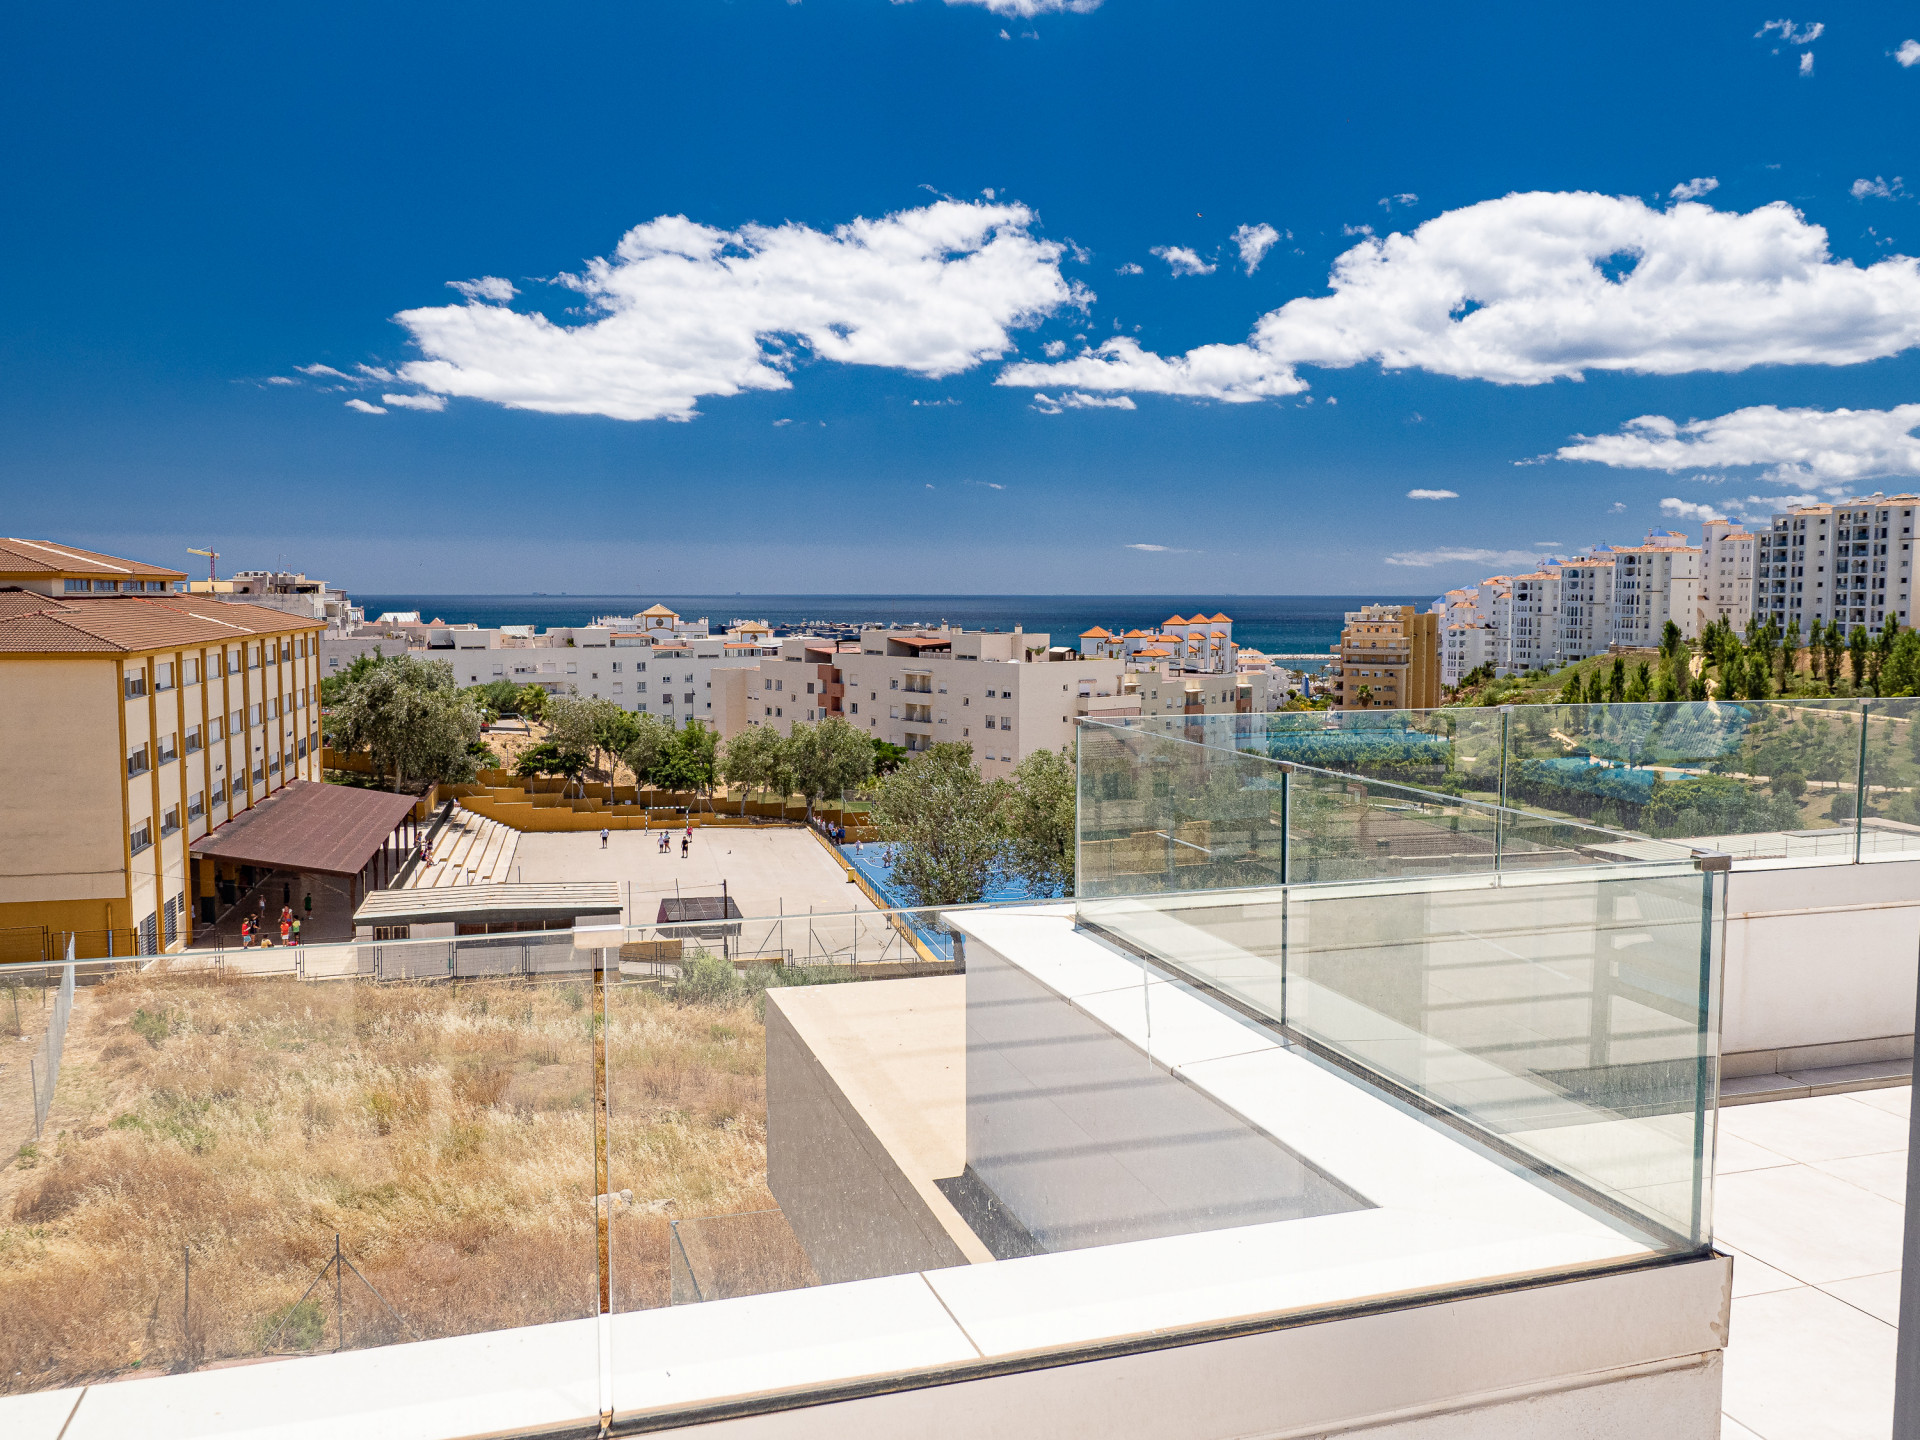 Splendid penthouse with terrace and solarium, modern and brand new located in the fabulous town of Estepona.